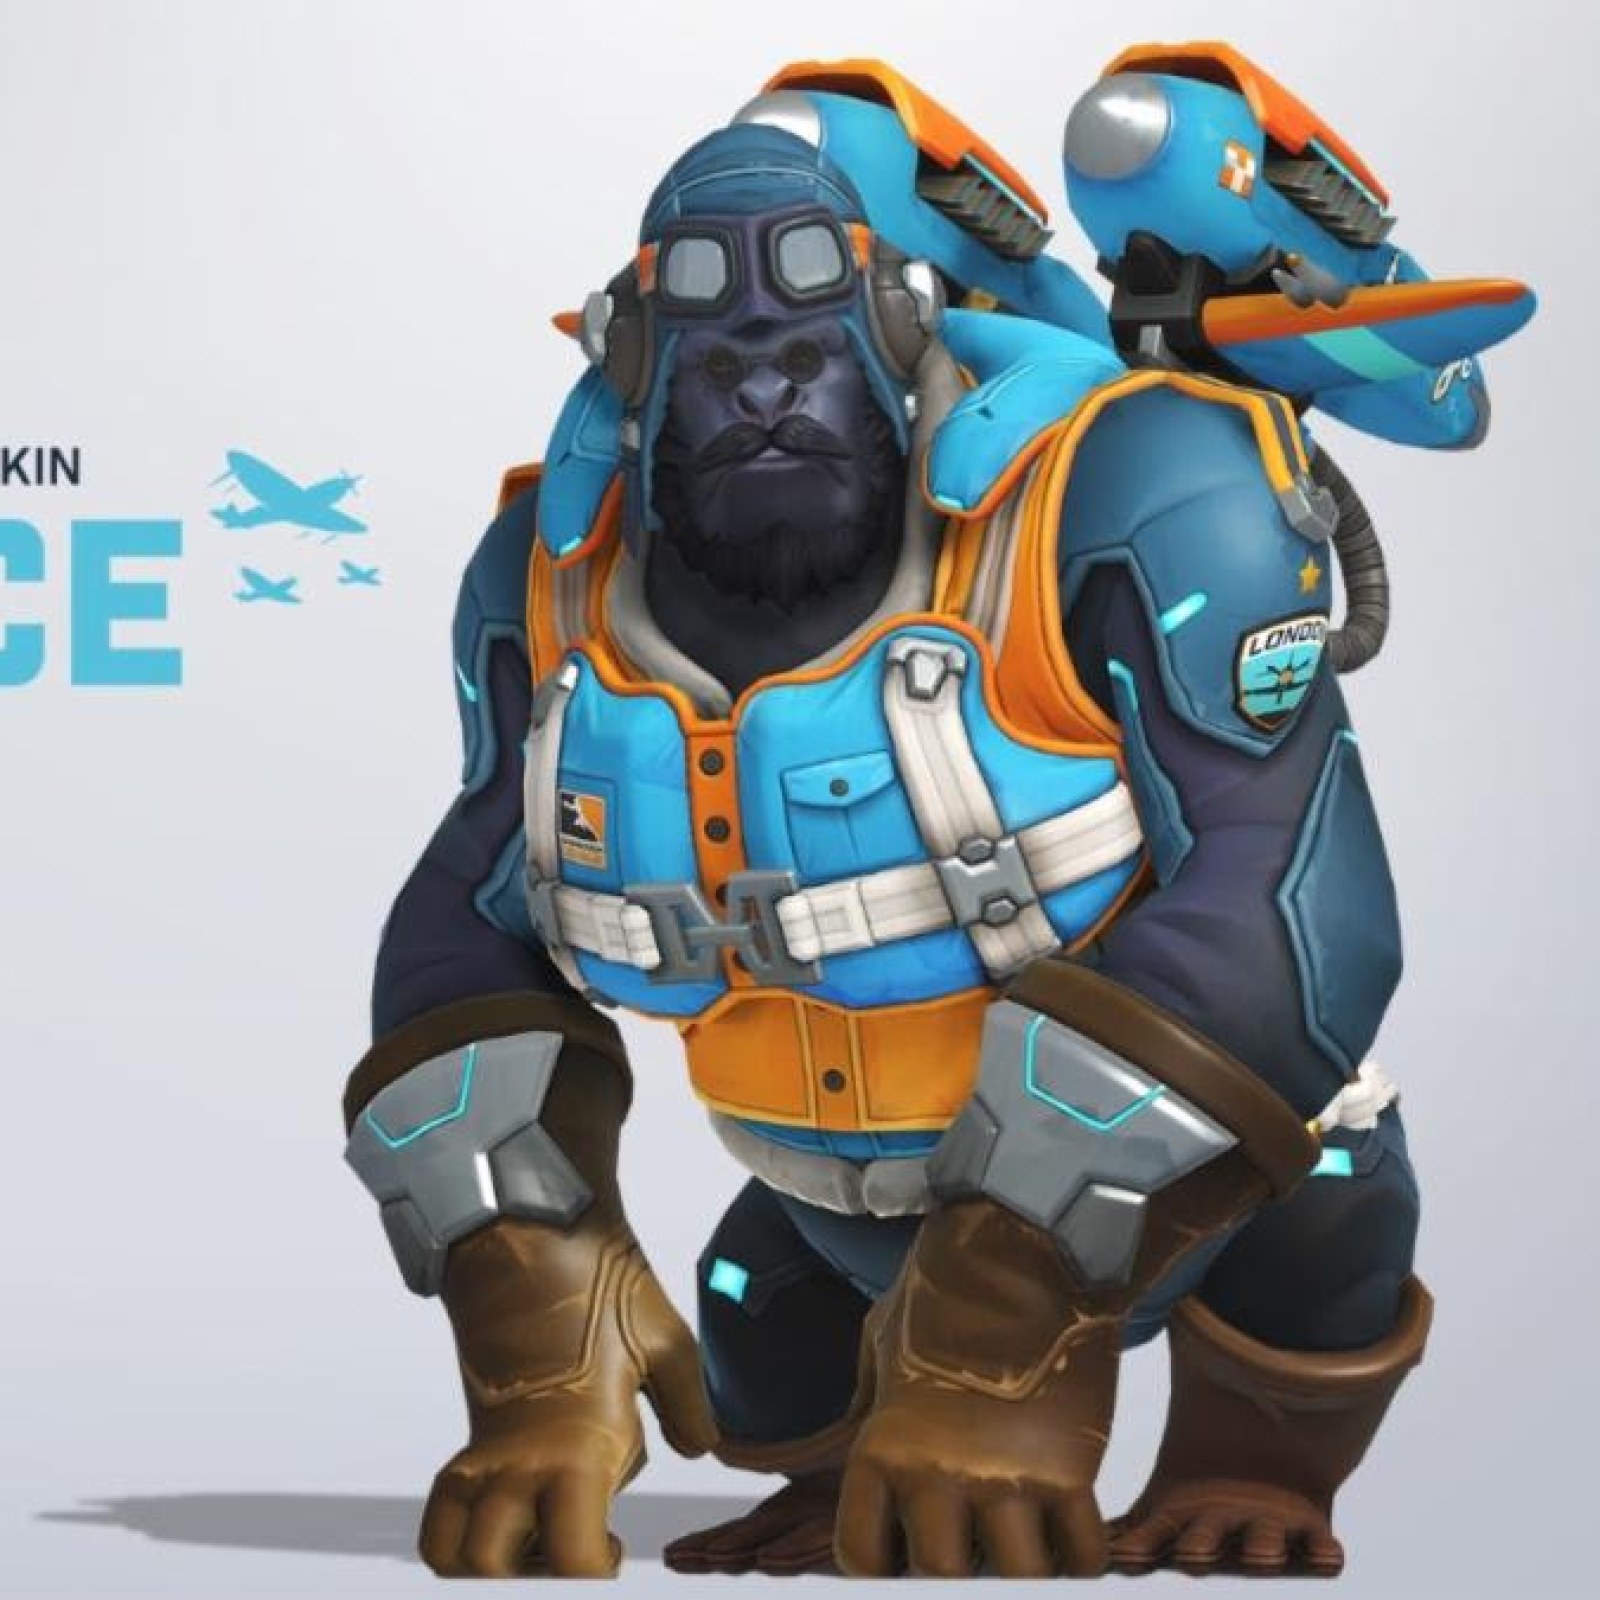 Overwatch Flying Ace Winston Skin How To Get Overwatch League Tokens